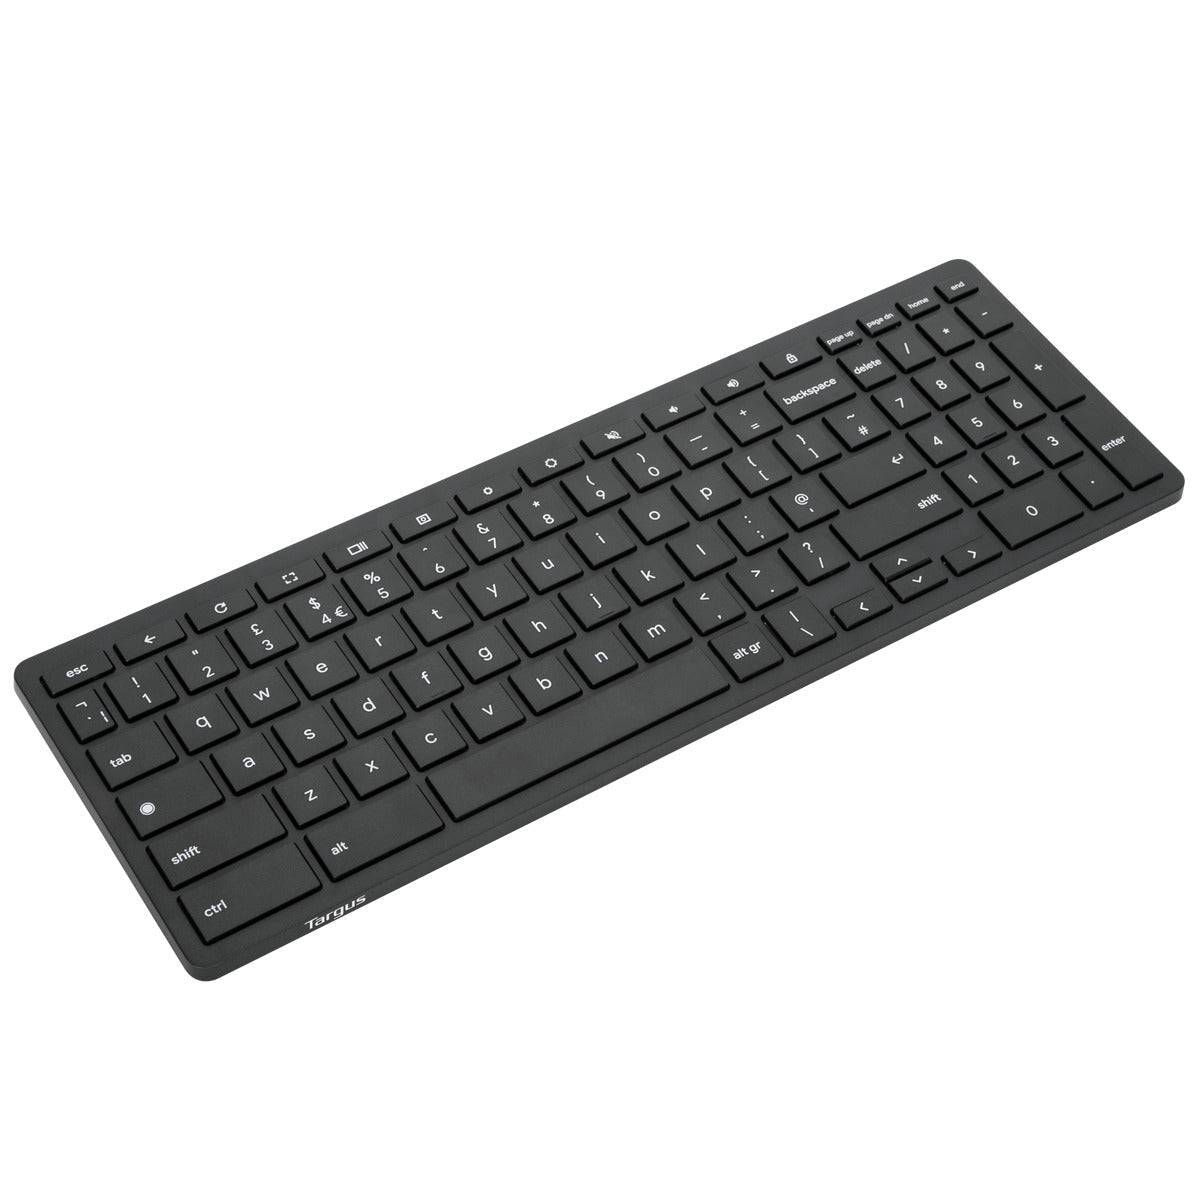 Rca Informatique - Image du produit : WORKS WITH CHROMEBOOK - BLUETOOTH ANTIMICROBIAL KEYBOARD